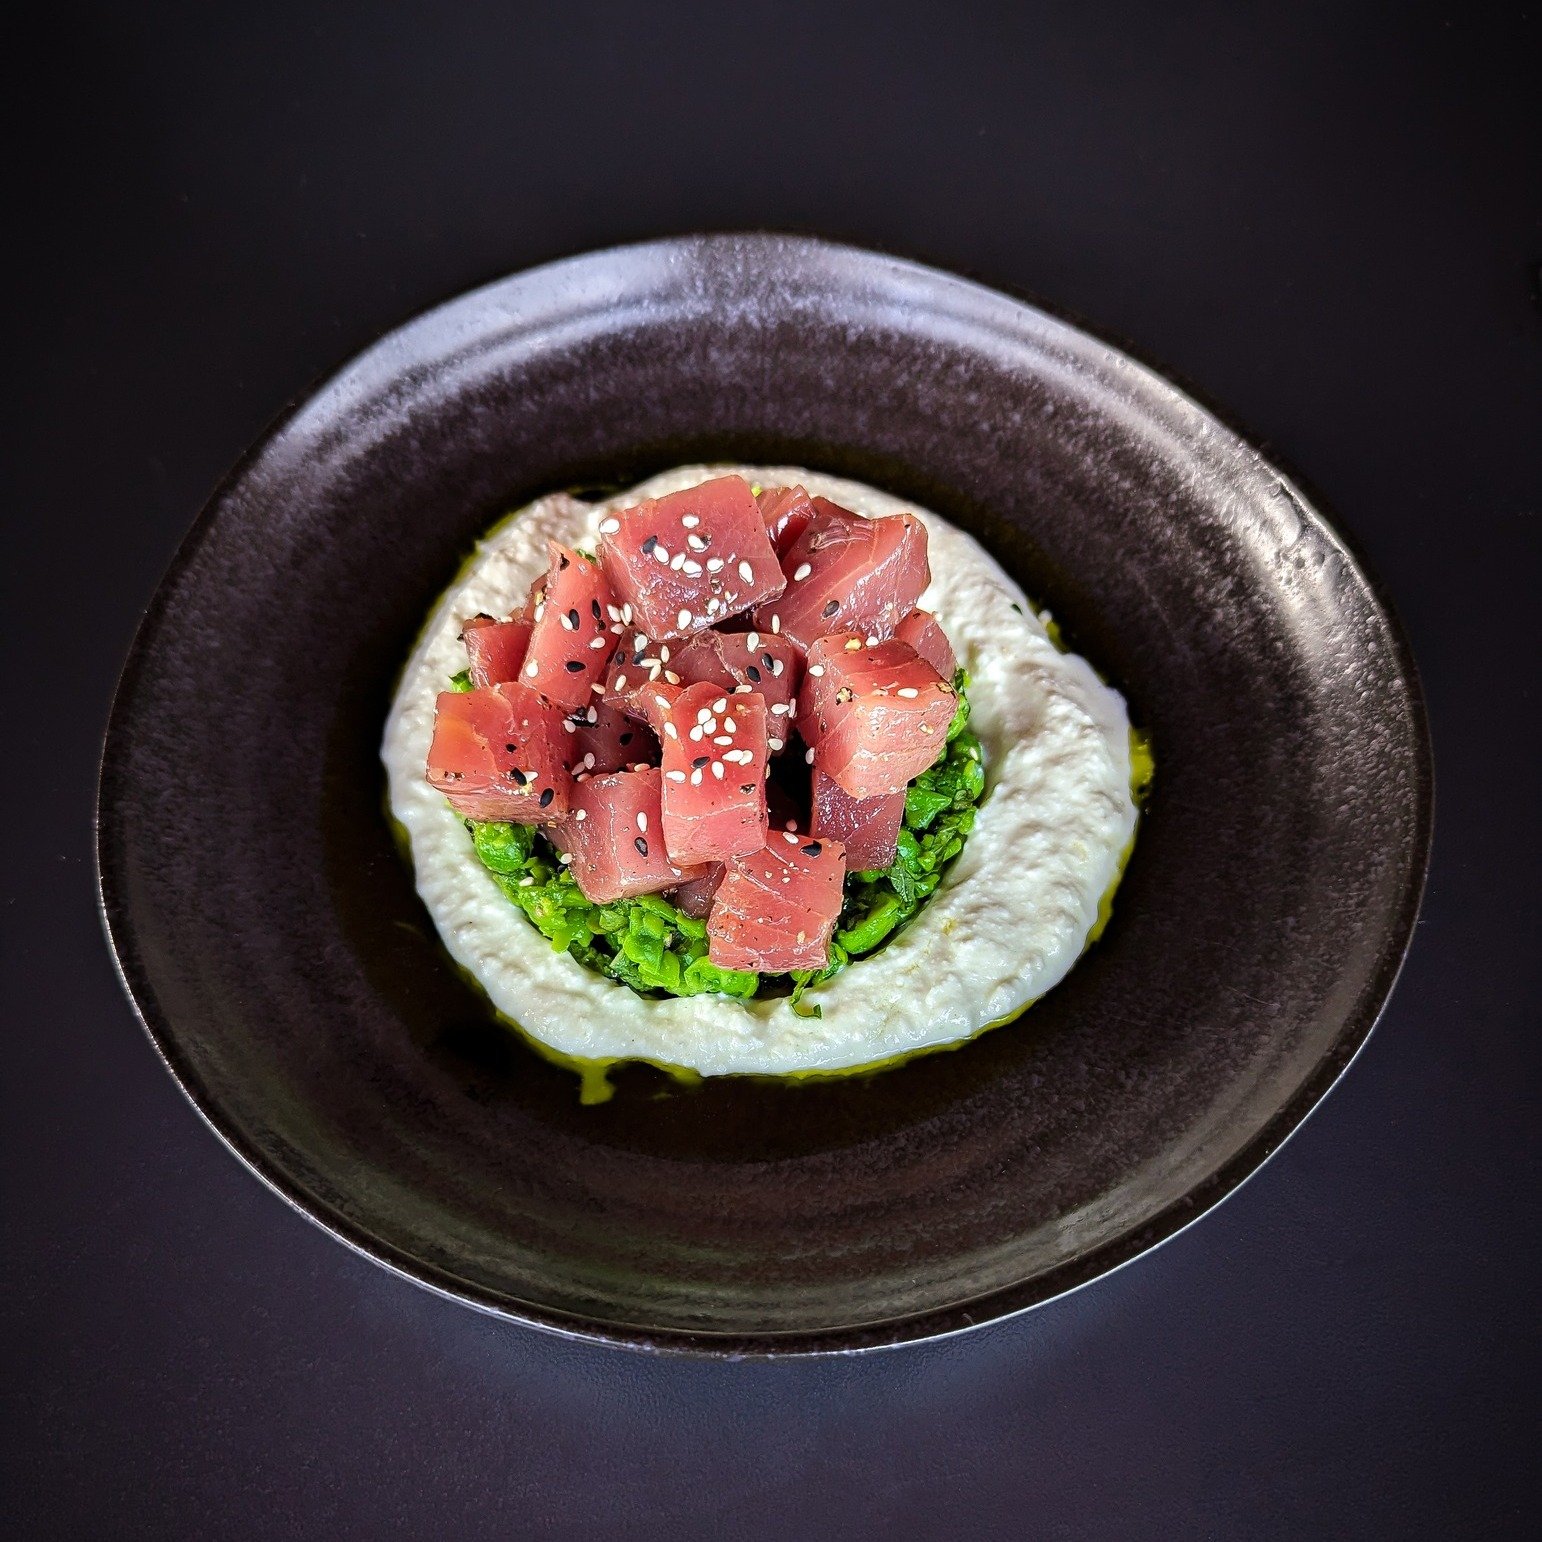 Our boat Selkie has been busy!  Fresh Tasmanian Bluefin Tuna has just hit the specials menu again in #MuresUpperDeck, bringing you an authentic Mures hook-to-plate dish.
.
Served with yuzu ponzu dressing, green peas, mint and @tongolacheese goat curd